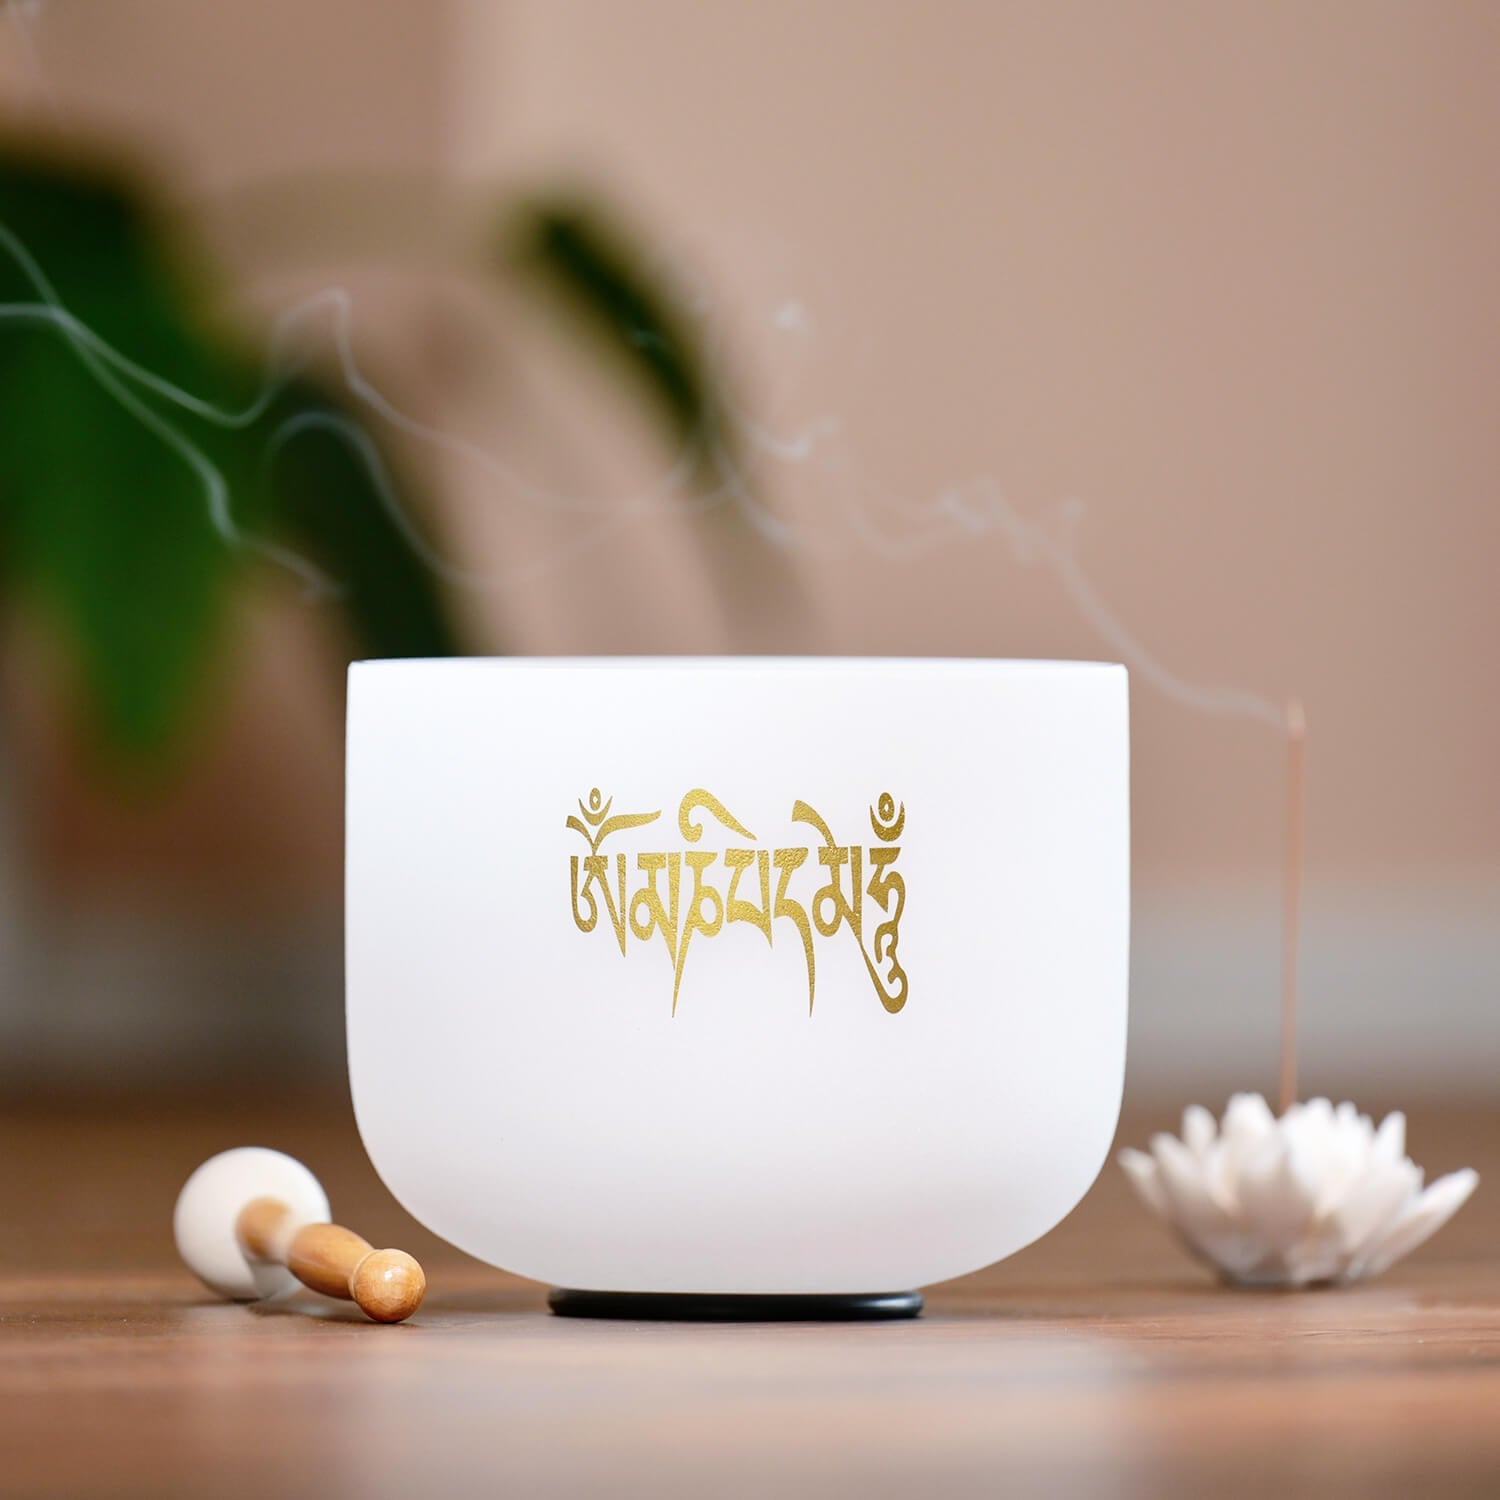 Six-Syllable Mantra Frosted Quartz Singing Bowl